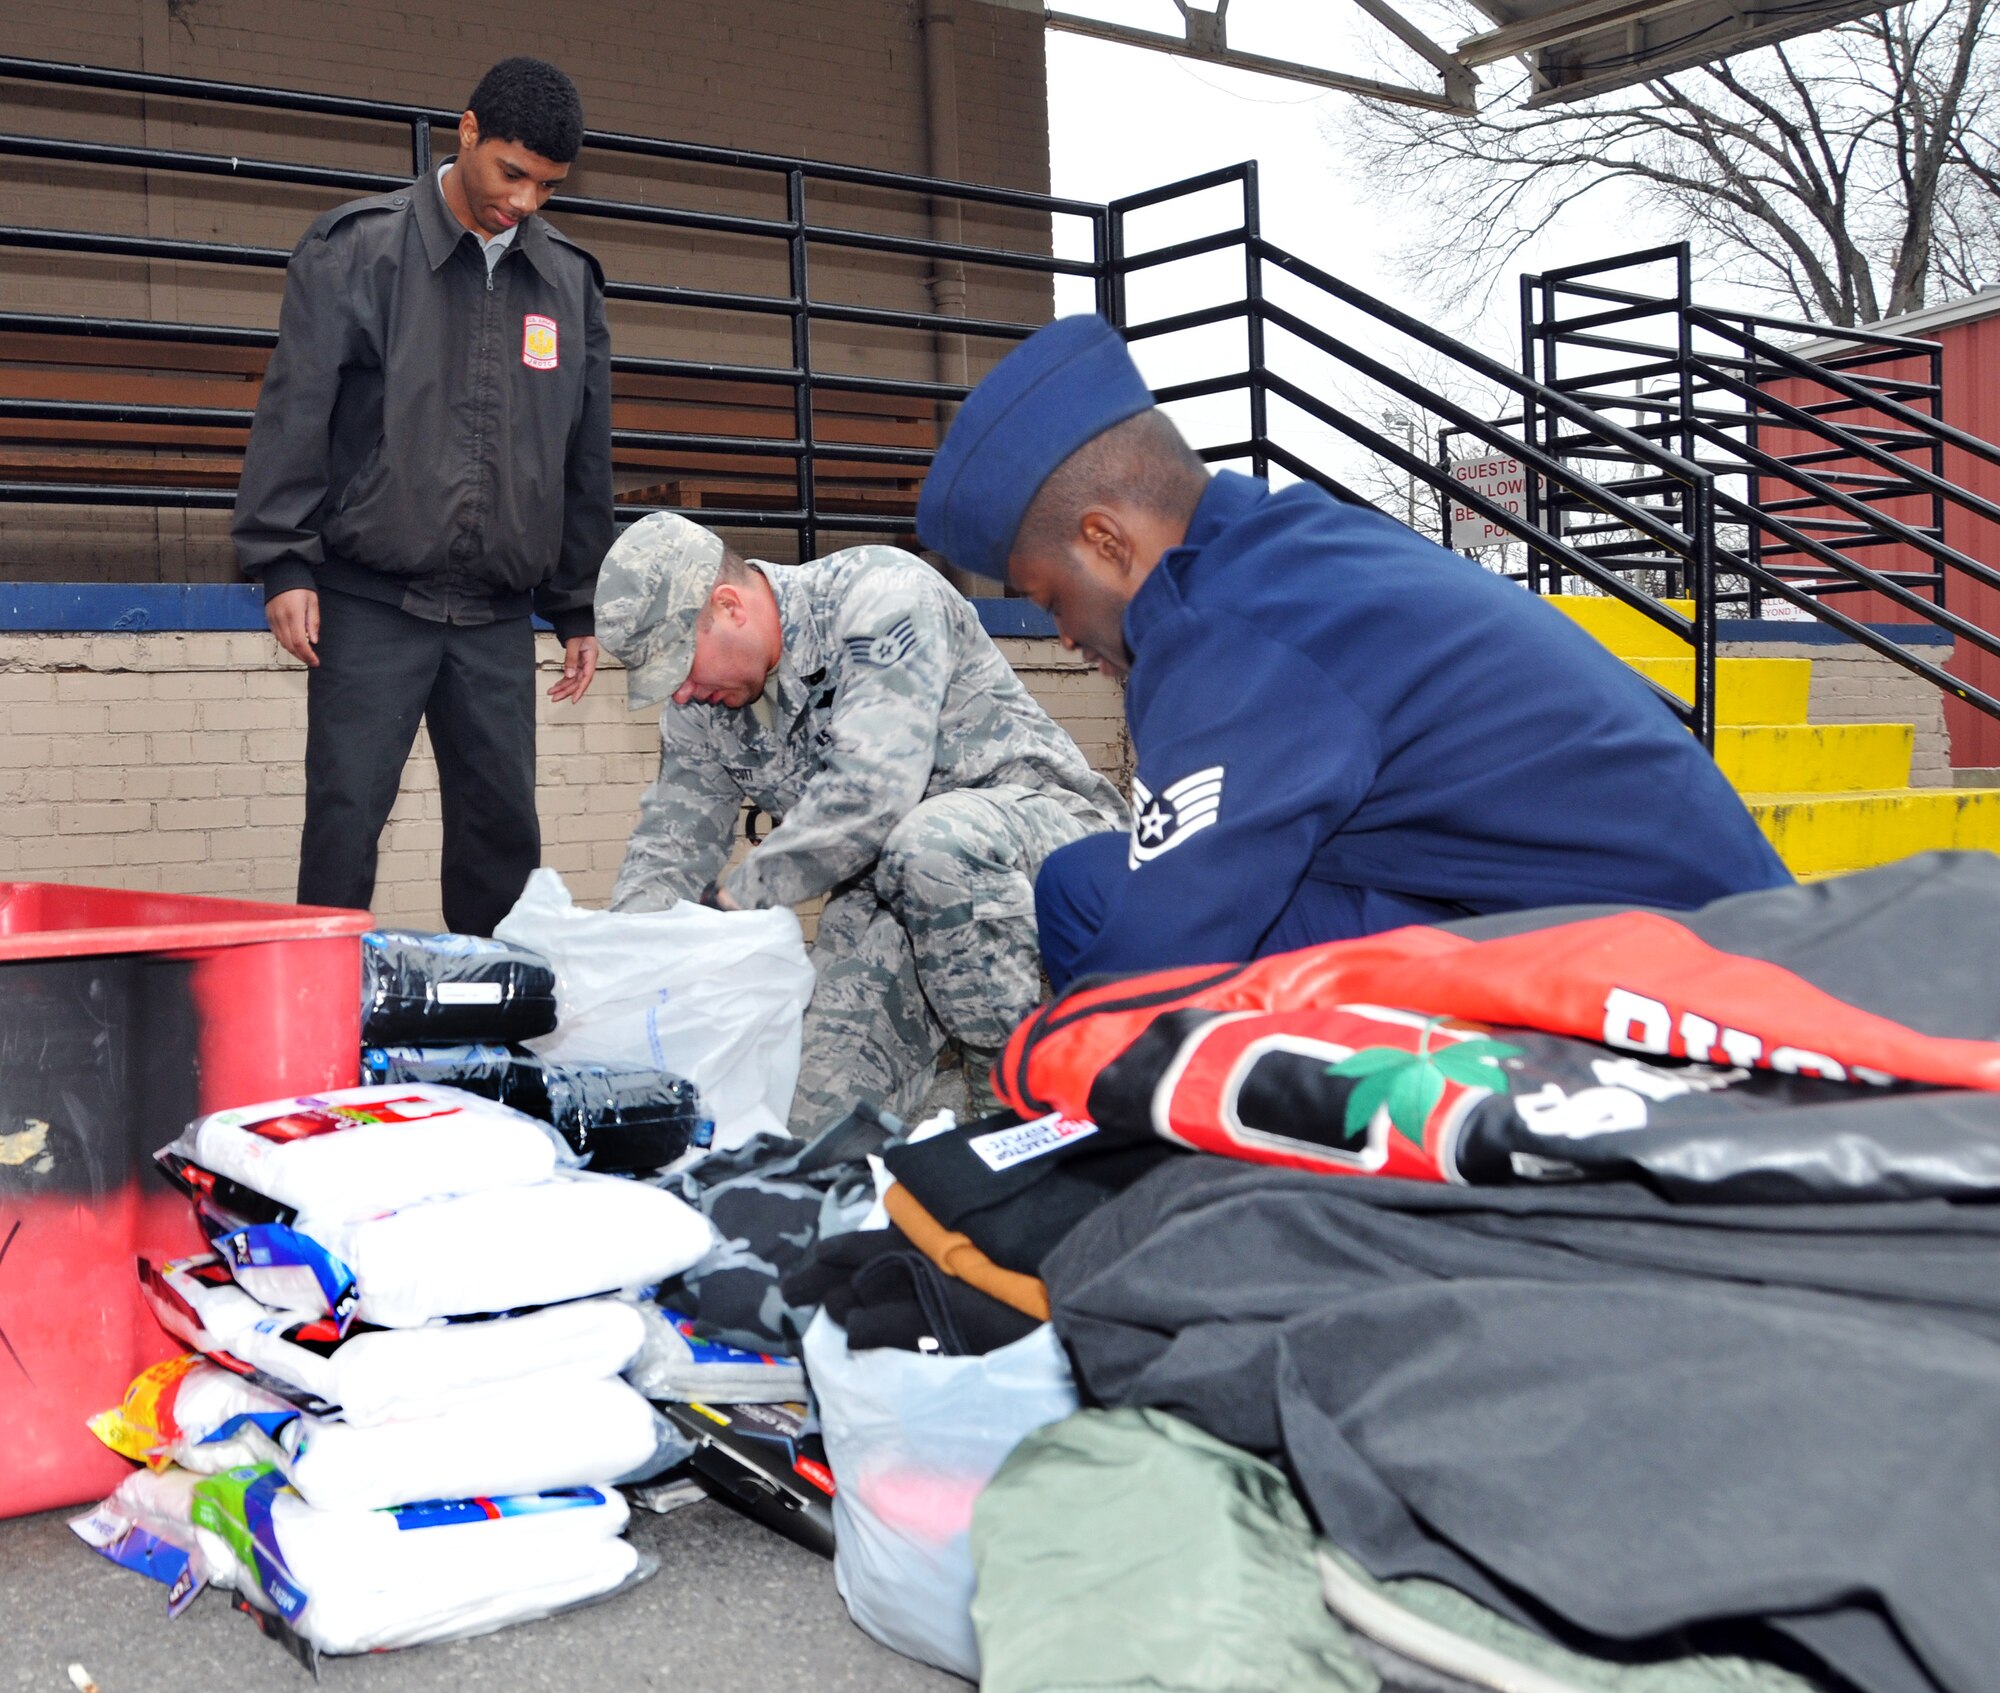 U.S. Air Force Tech. Sgt. Lonnie Brooks, Vice President of the 145th Airlift Wing’s Chapter 7 Association, Director at Large, Staff Sgt. Jessie Huneycutt and Gregory Landrum, a student from Military Global Leadership Academy, a high school located in Charlotte, N.C., sort through men’s coats, hats, gloves and other items donated by members of the North Carolina Air National Guard.  Warm clothes were delivered to the local men’s shelter just as another winter storm pelted Charlotte, N.C. leaving a blanket of snow and ice and many homes without power. (U.S. Air National Guard photo by Master Sgt. Patricia F. Moran/Released) 